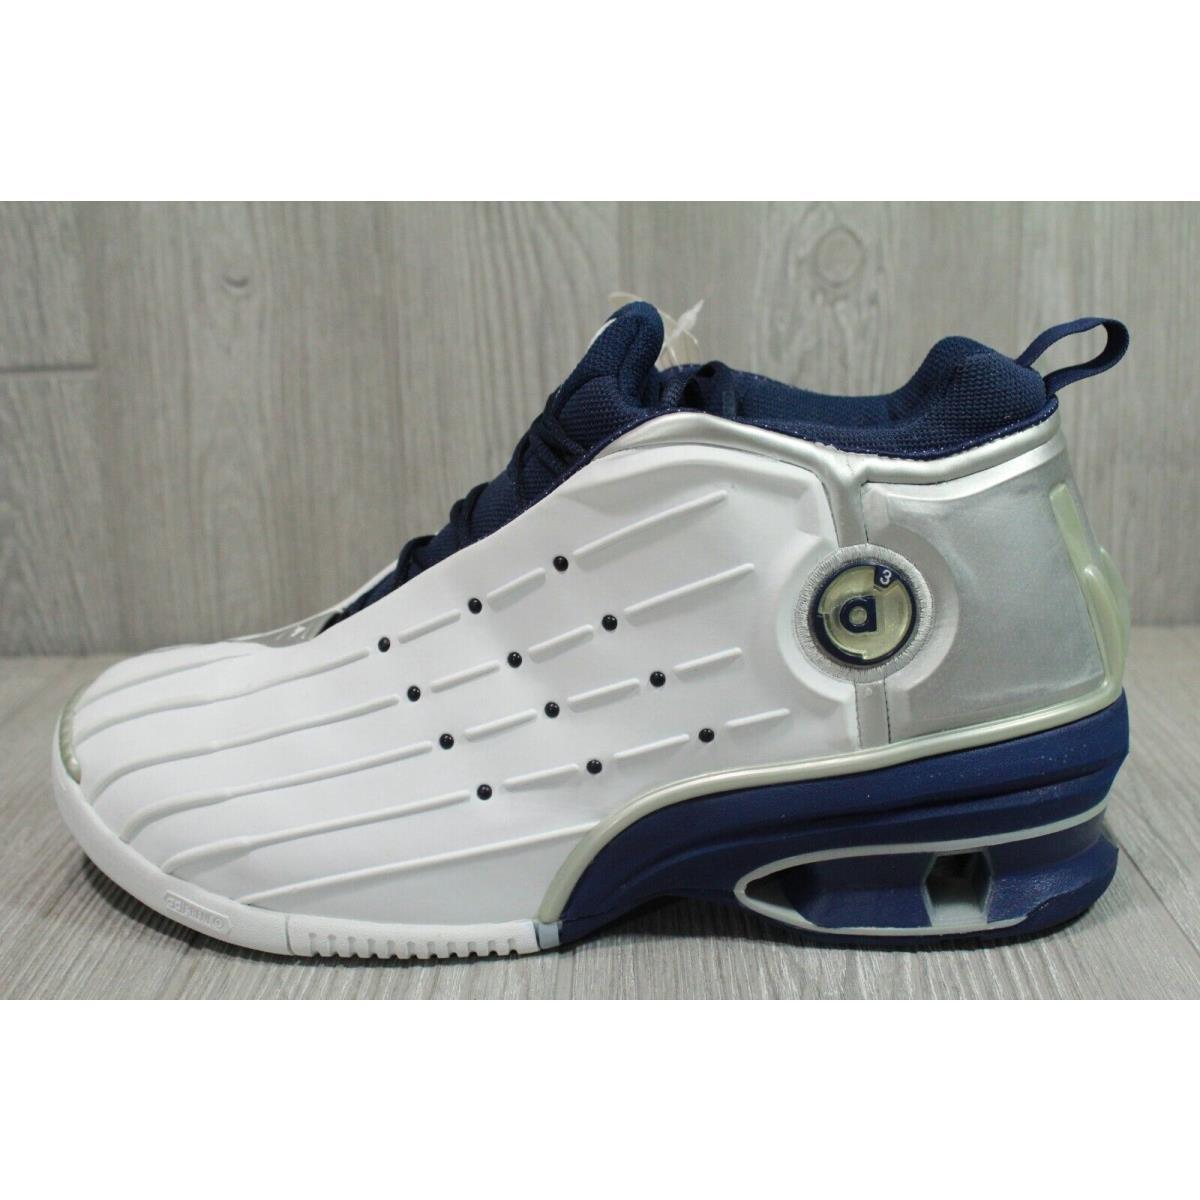 Vintage Adidas A3 Bball 2002 Basketball Shoes Size 8 - 12 Oss